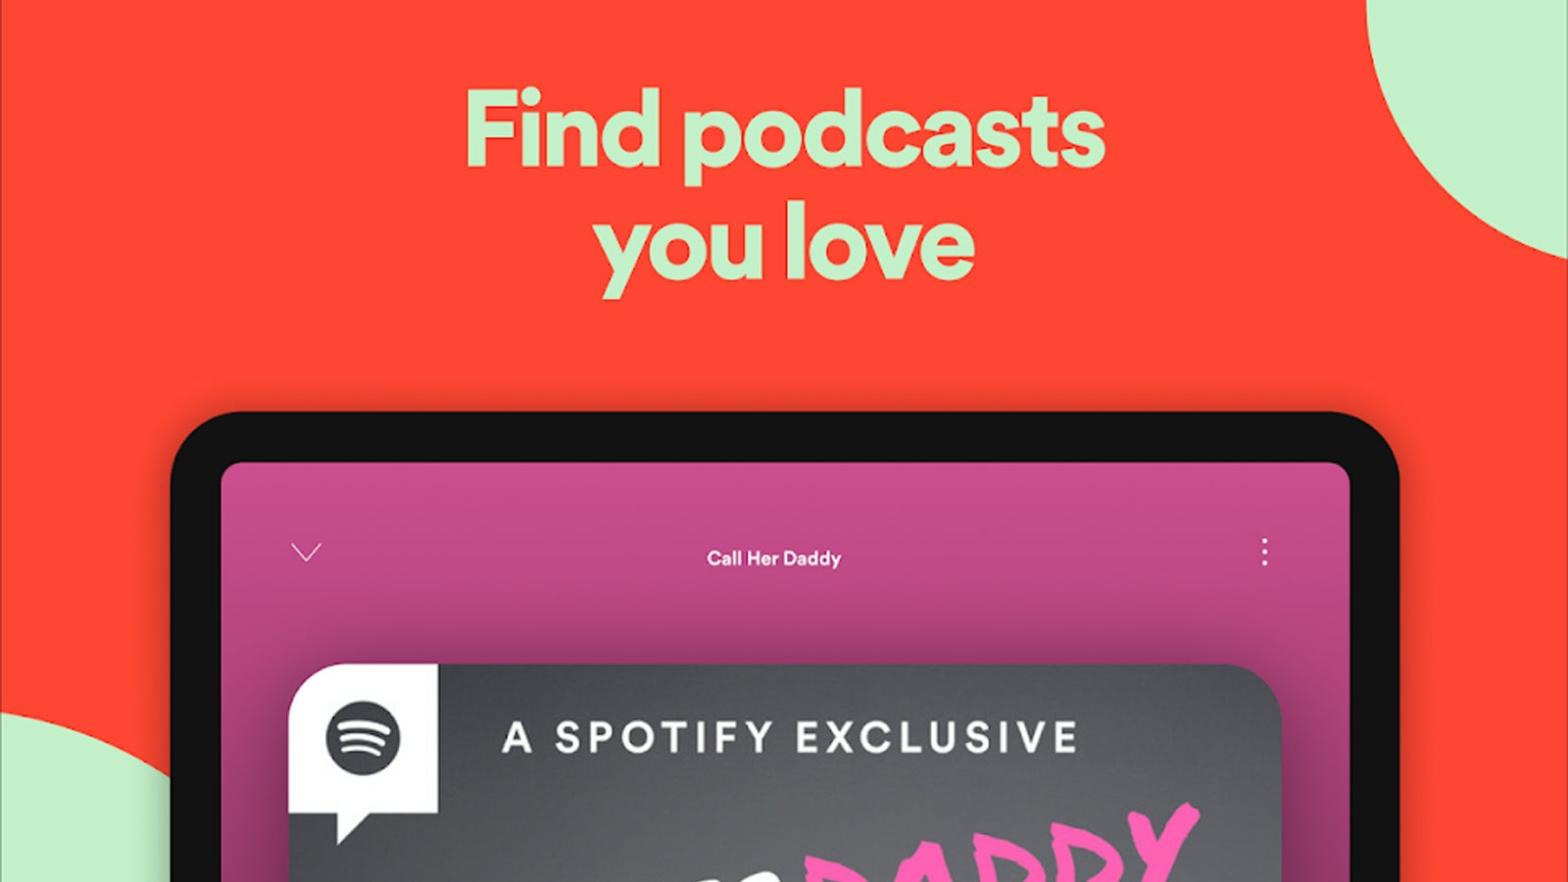 Spotify keeps pushing its podcast playing capabilities. (Image: Spotify)